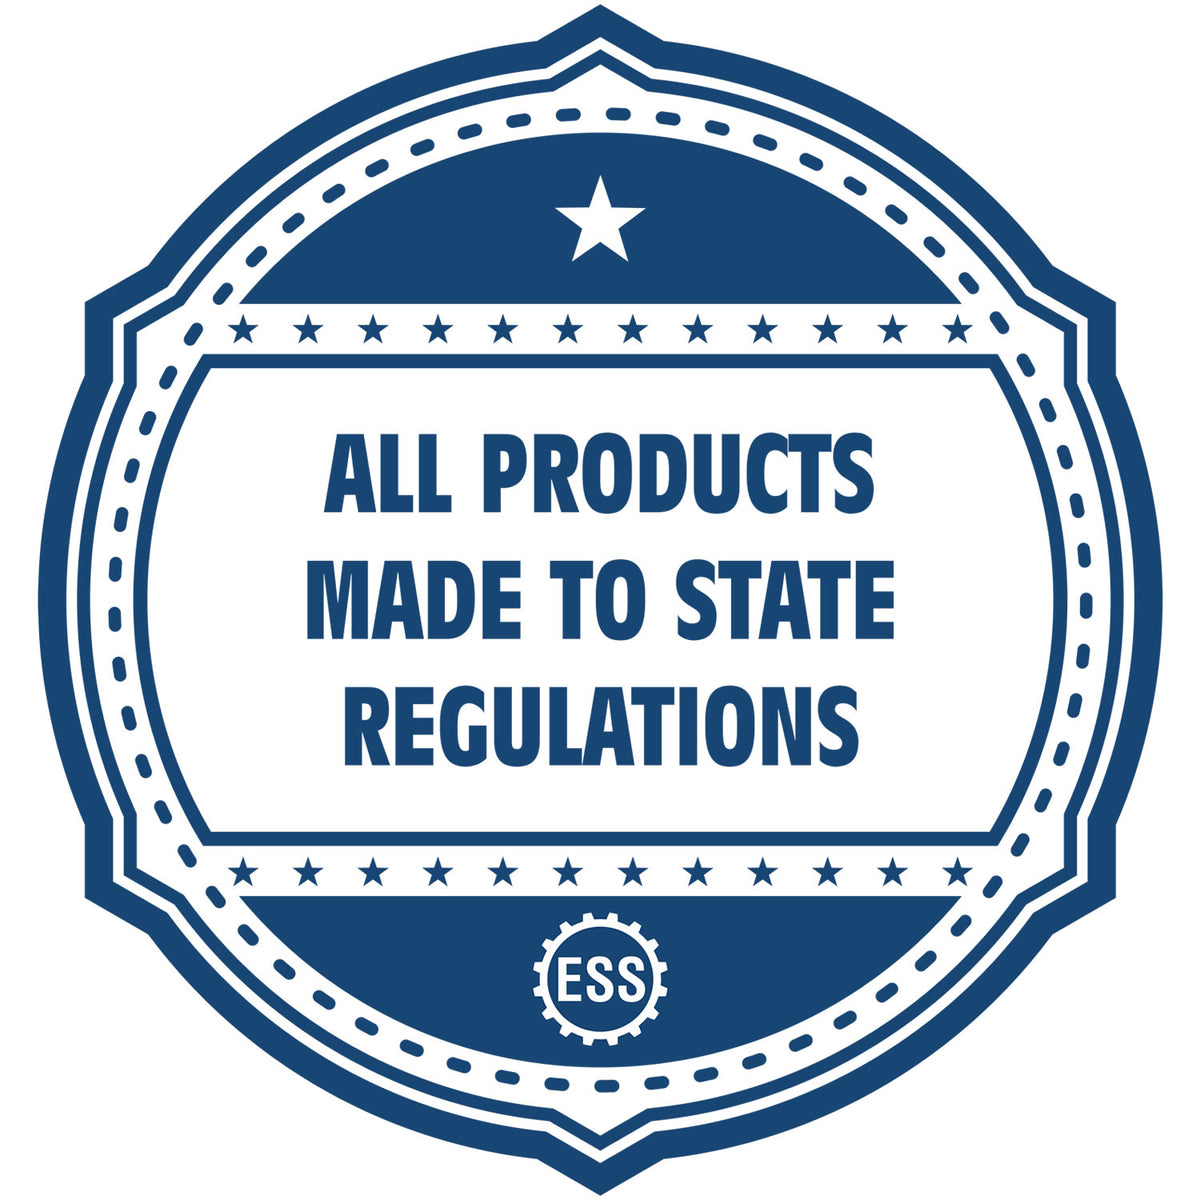 A blue icon or badge for the Hybrid Kentucky Landscape Architect Seal showing that this product is made in compliance with state regulations.